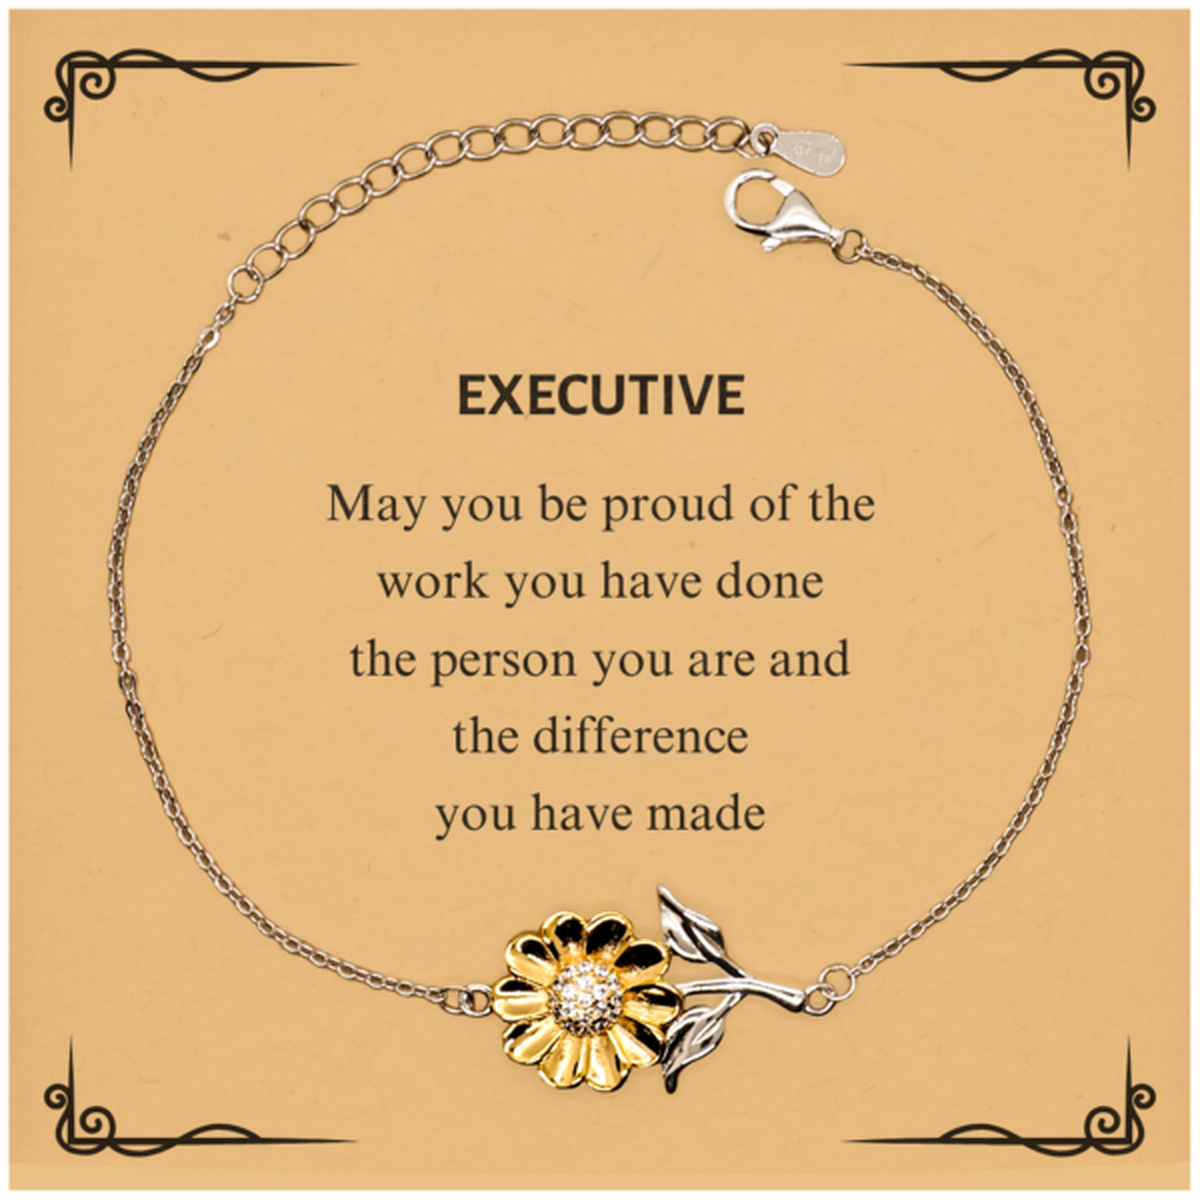 Executive May you be proud of the work you have done, Retirement Executive Sunflower Bracelet for Colleague Appreciation Gifts Amazing for Executive